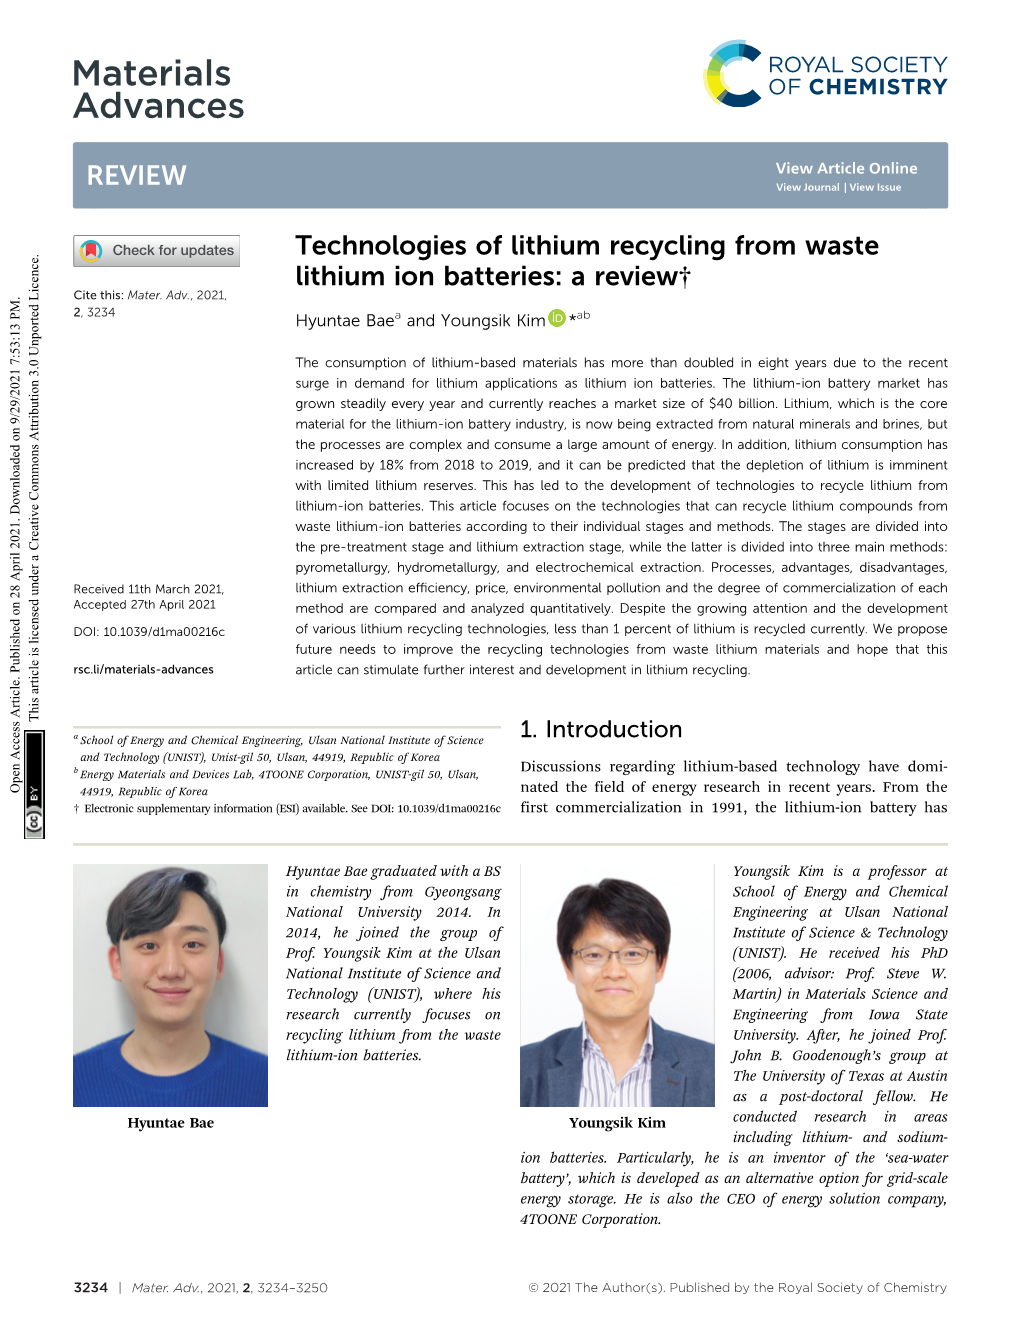 Technologies of Lithium Recycling from Waste Lithium Ion Batteries: a Review† Cite This: Mater